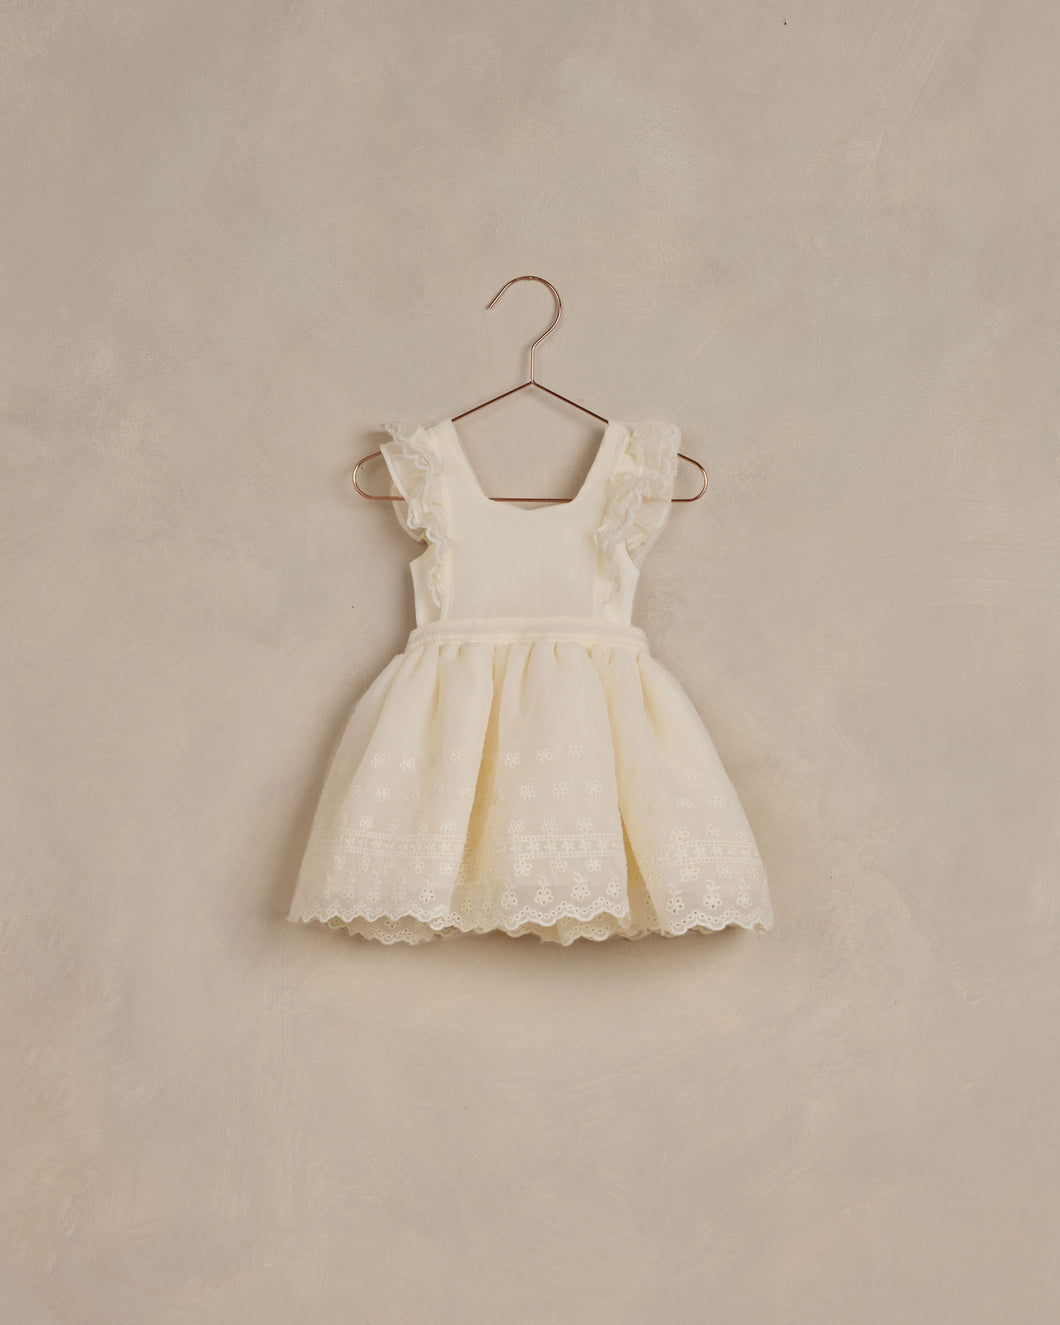 Ivory dress with ruffle sleeves and a vintage inspired skirt featuring lace.